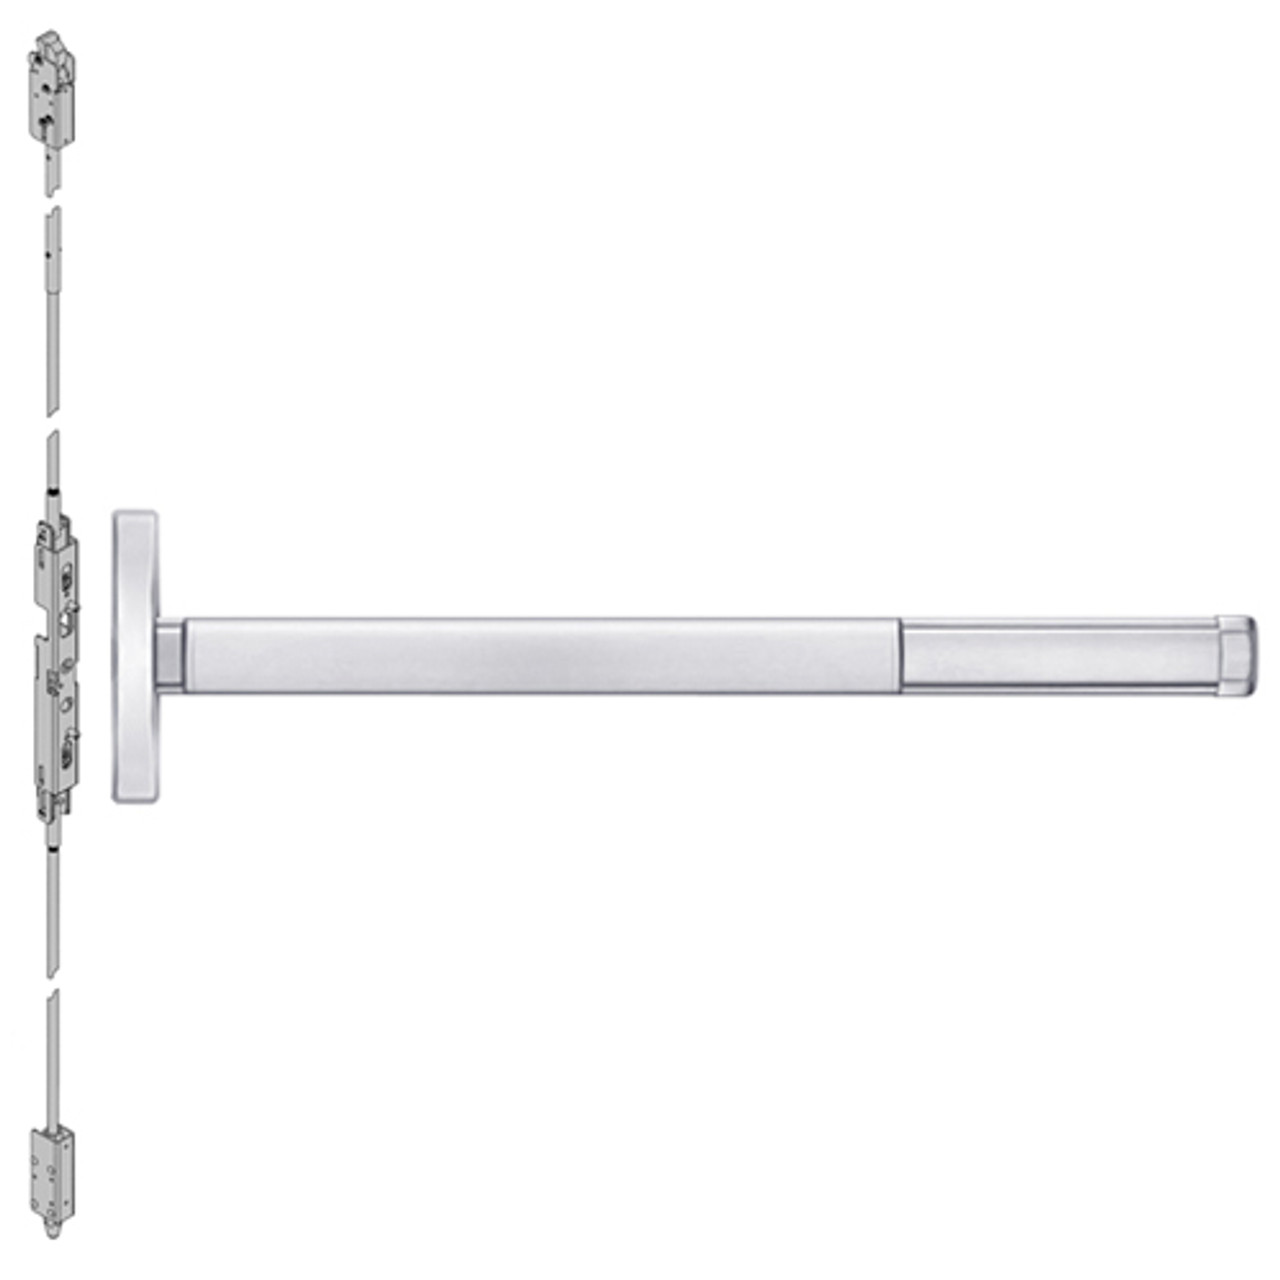 2602-625-48 PHI 2600 Series Non Fire Rated Concealed Vertical Rod Exit Device Prepped for Dummy Trim in Bright Chrome Finish